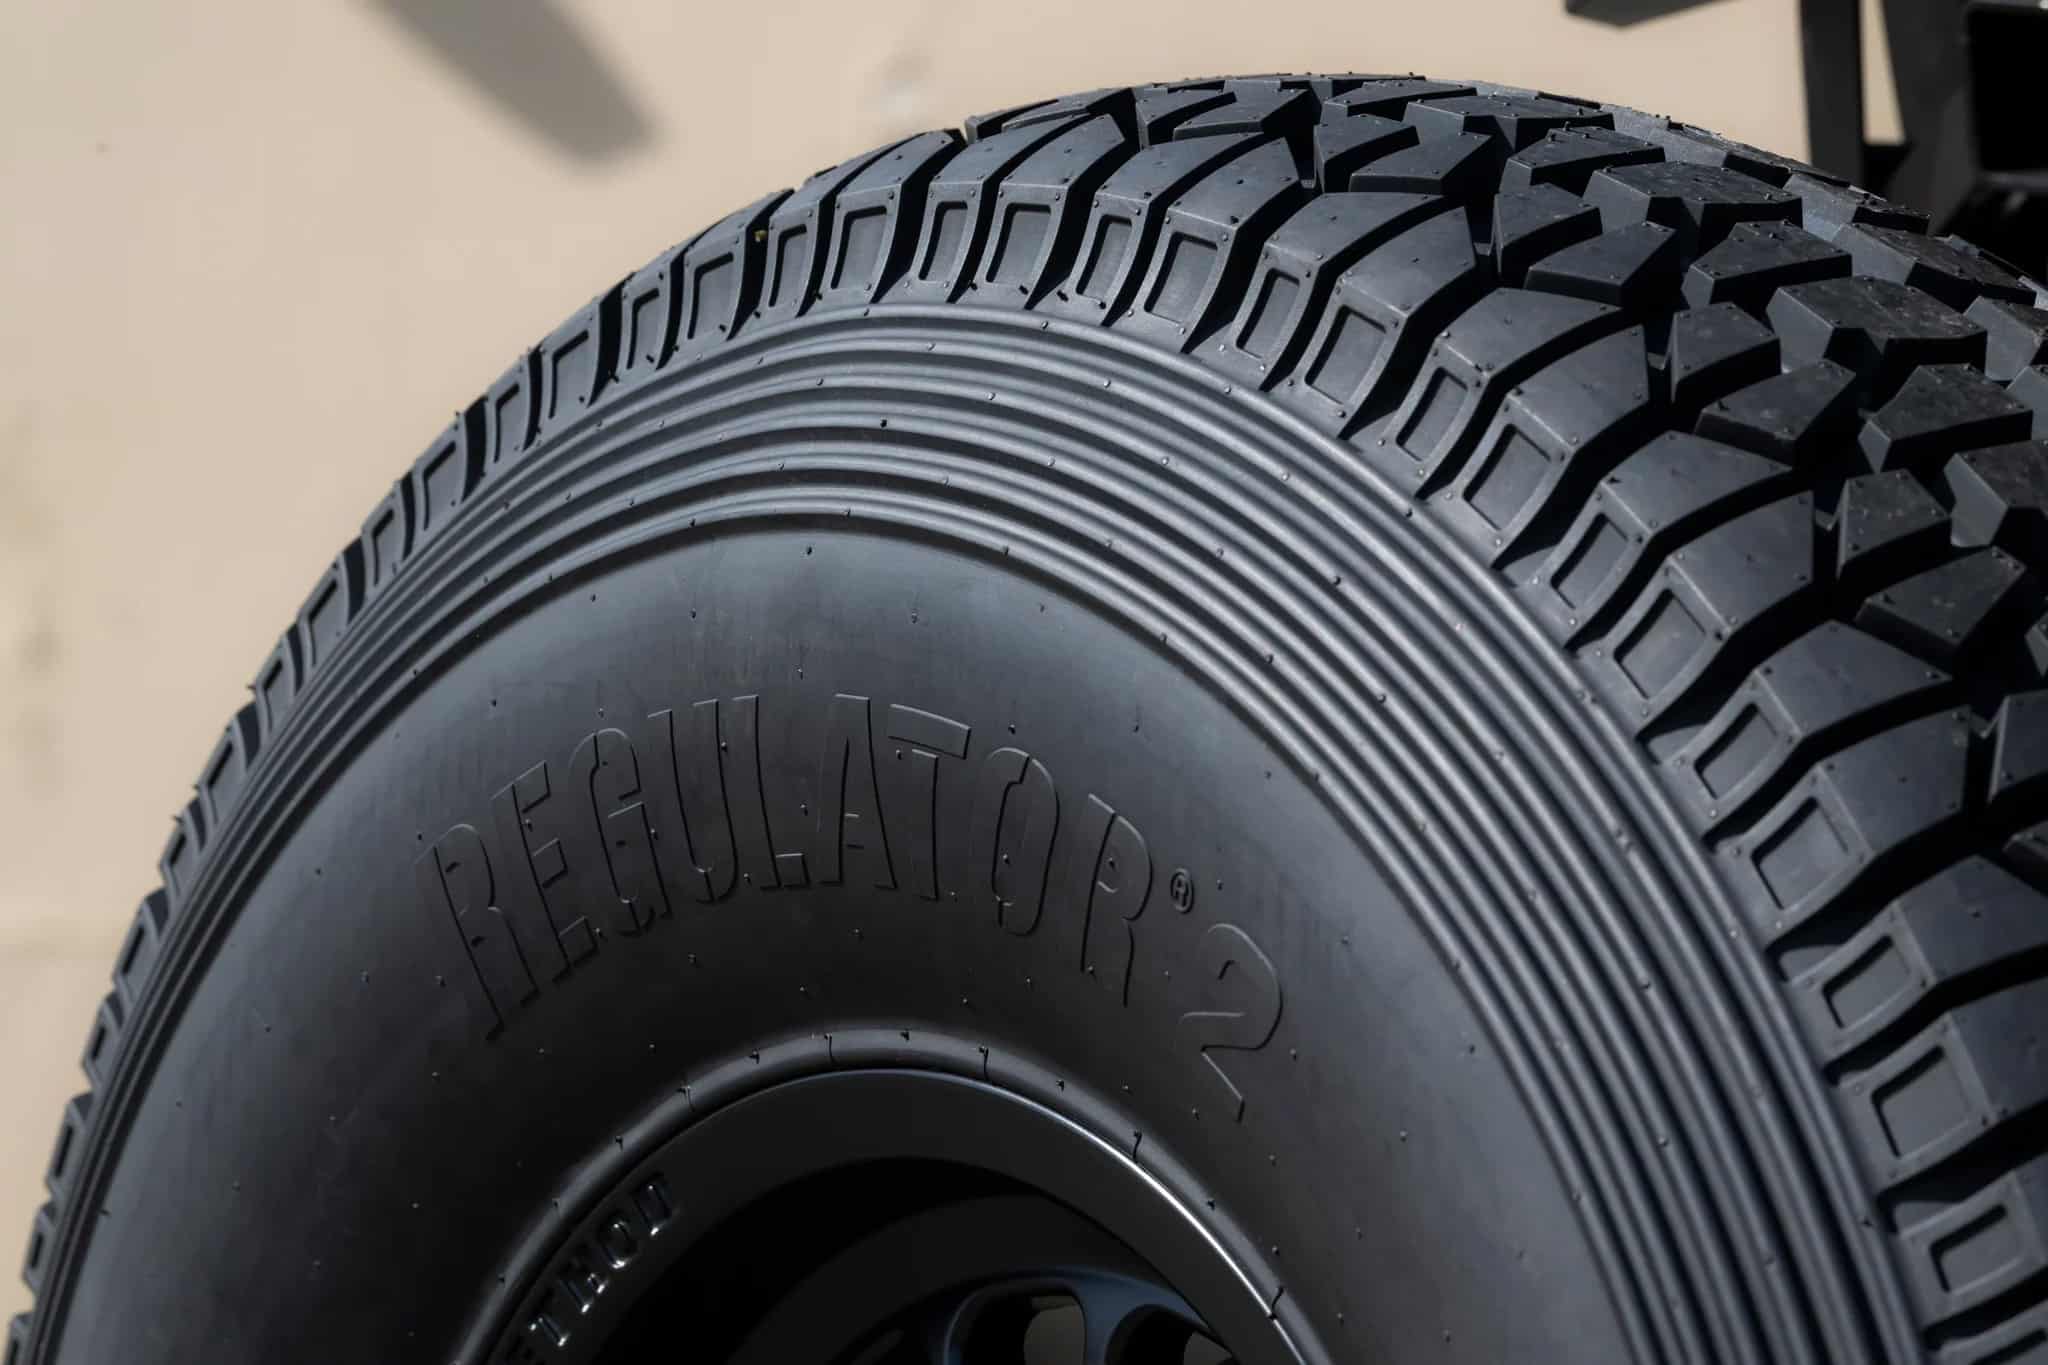 Close up of tire and tread for Tensor Regulator 2